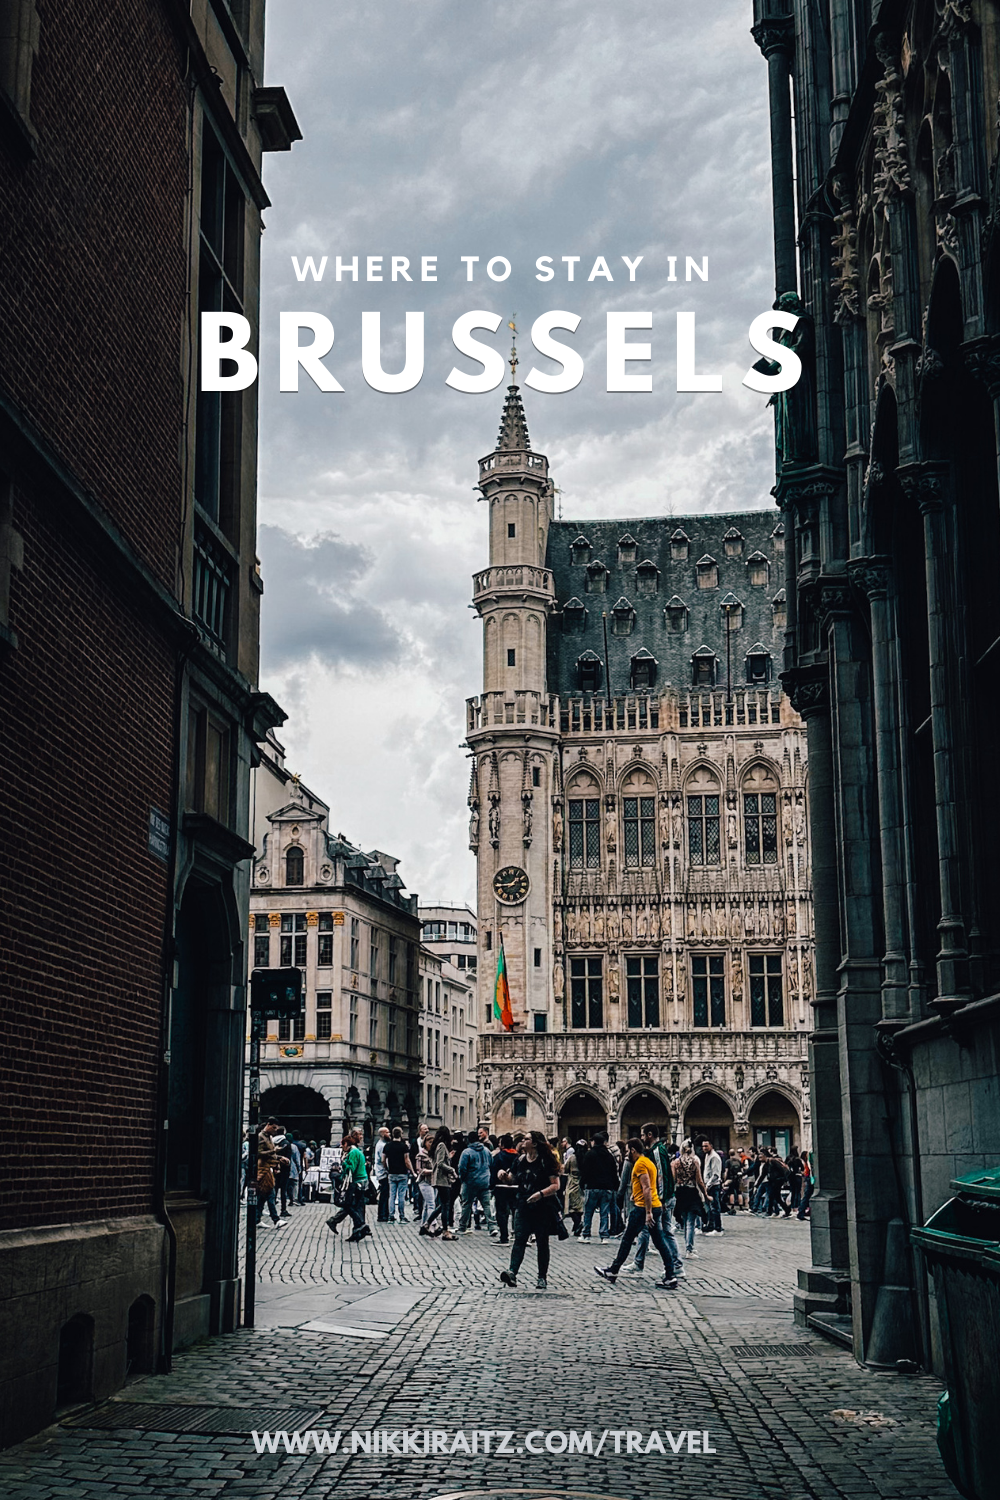 Where to Stay in Brussels, Belgium from a Trusted Traveler - find out more about the best hotels &amp; hostels to fit your travel aesthetic for your getaway to Belgium